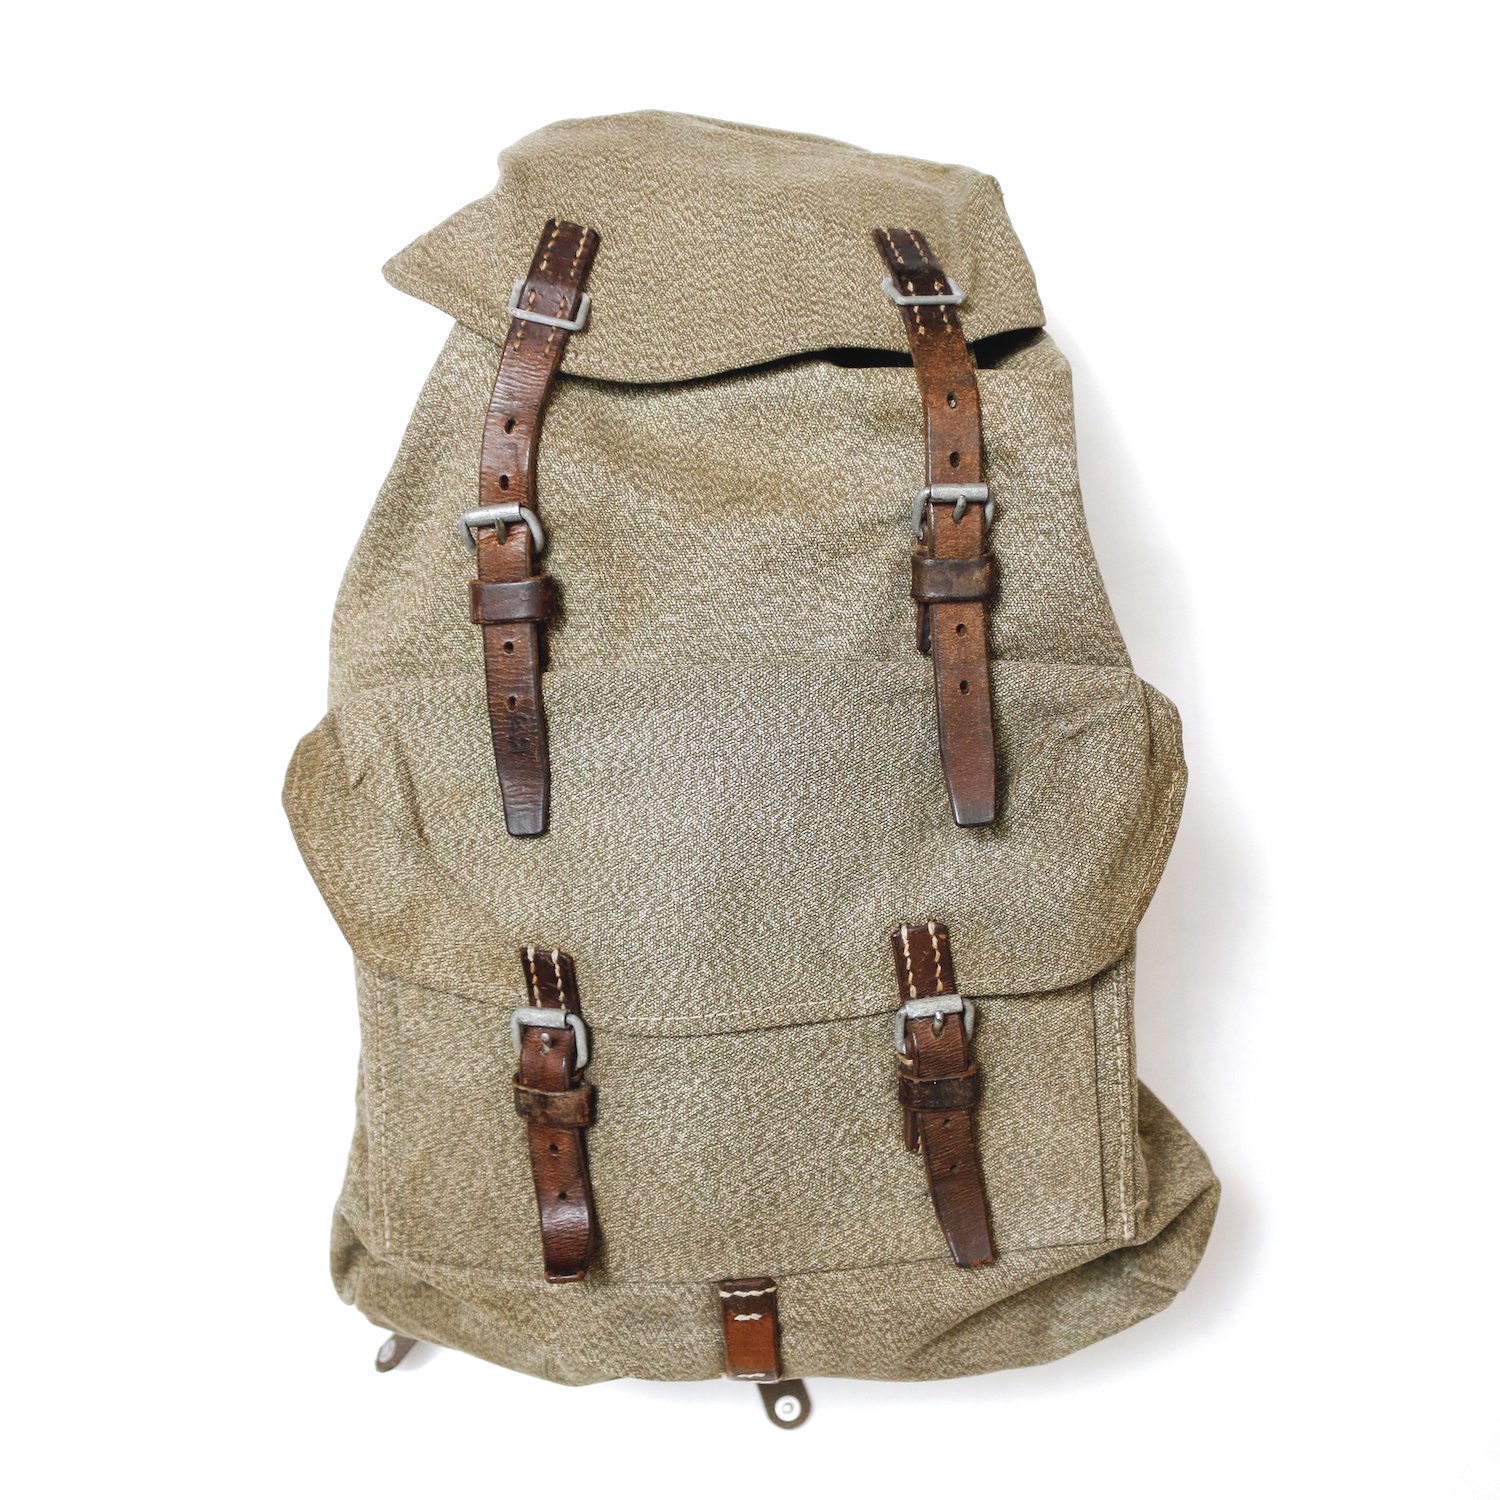 <img class='new_mark_img1' src='https://img.shop-pro.jp/img/new/icons8.gif' style='border:none;display:inline;margin:0px;padding:0px;width:auto;' />MILITARY /  58's Swiss Army Vintage Bag